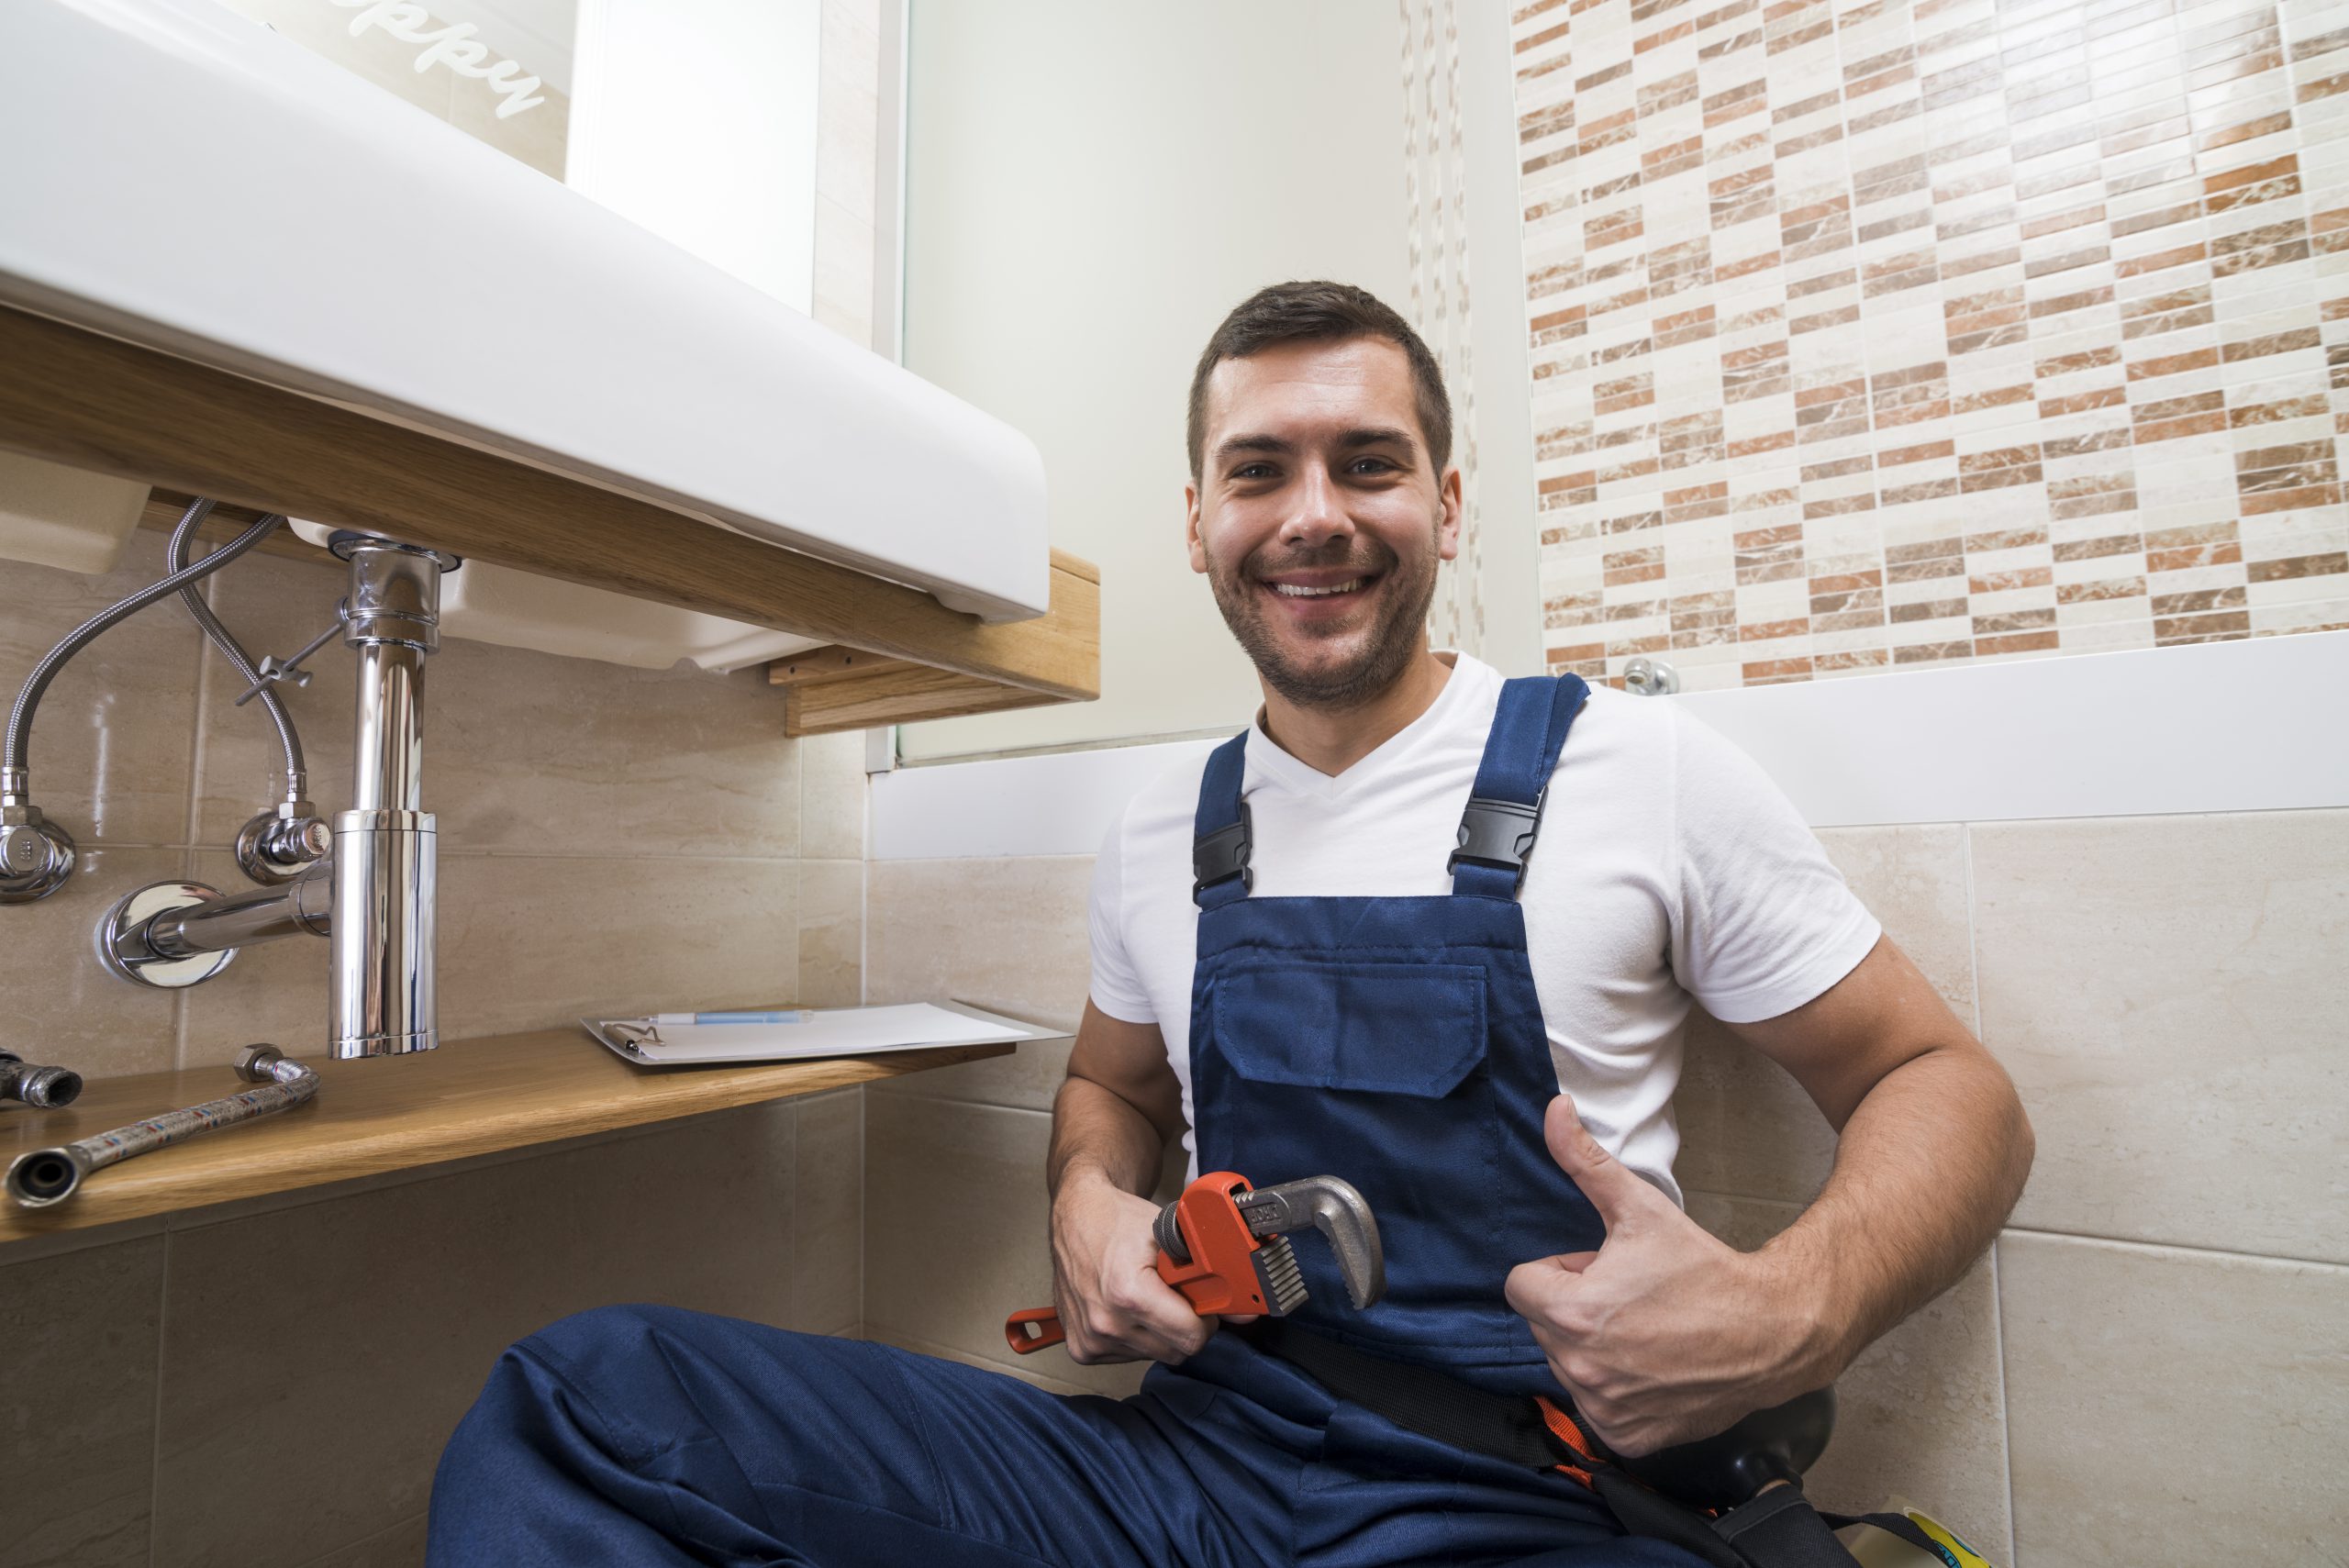 Apply for job as a plumber in Japan and earn up to 1 lakh INR picture